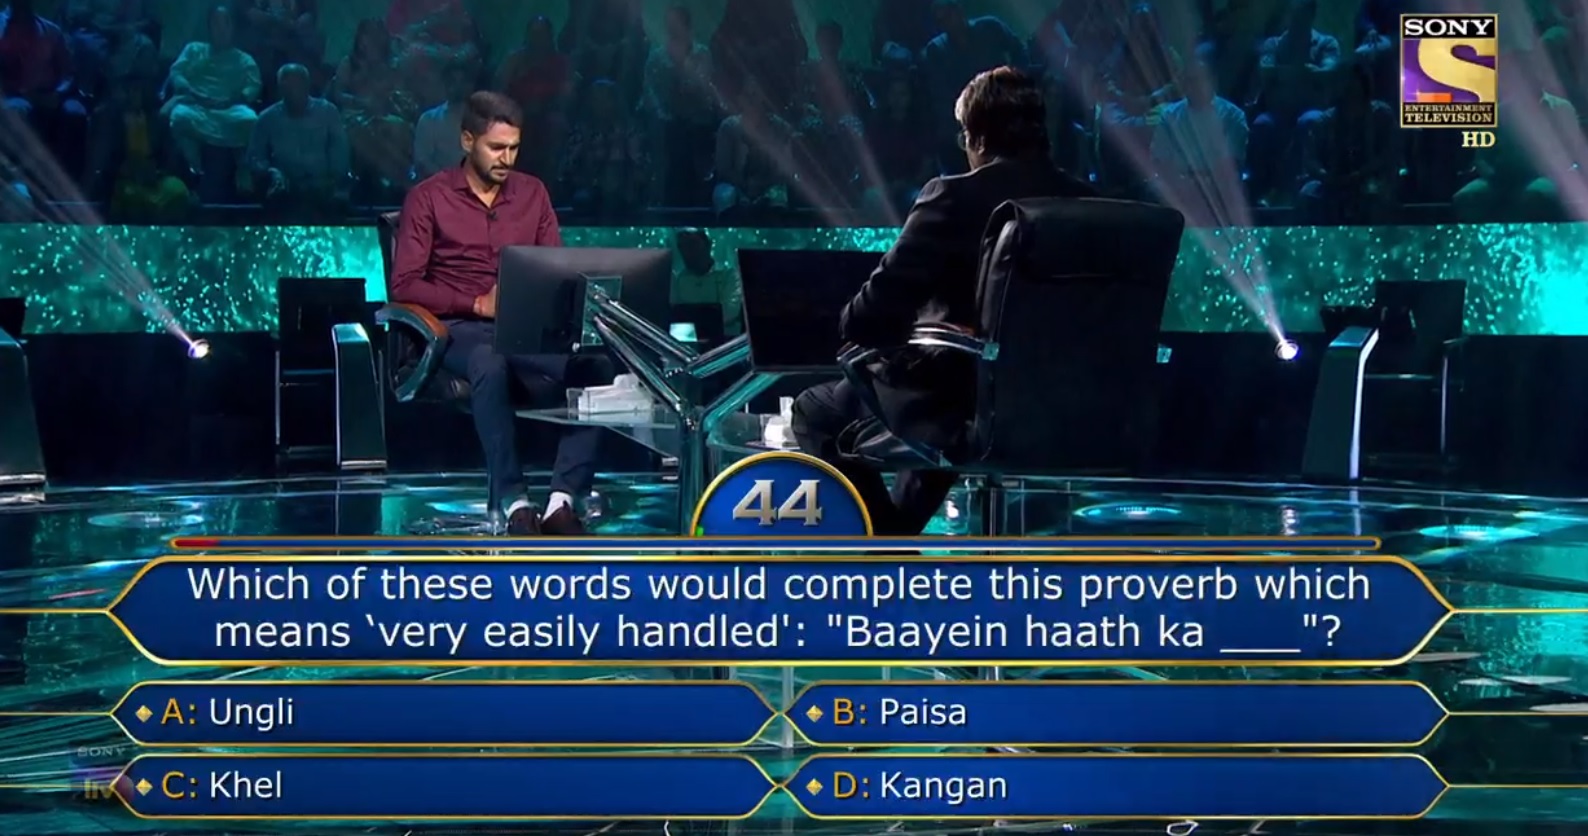 Ques : Which of these words would complete this proverb which means ‘very easily handled’ : “Baayein haath ka ________”?